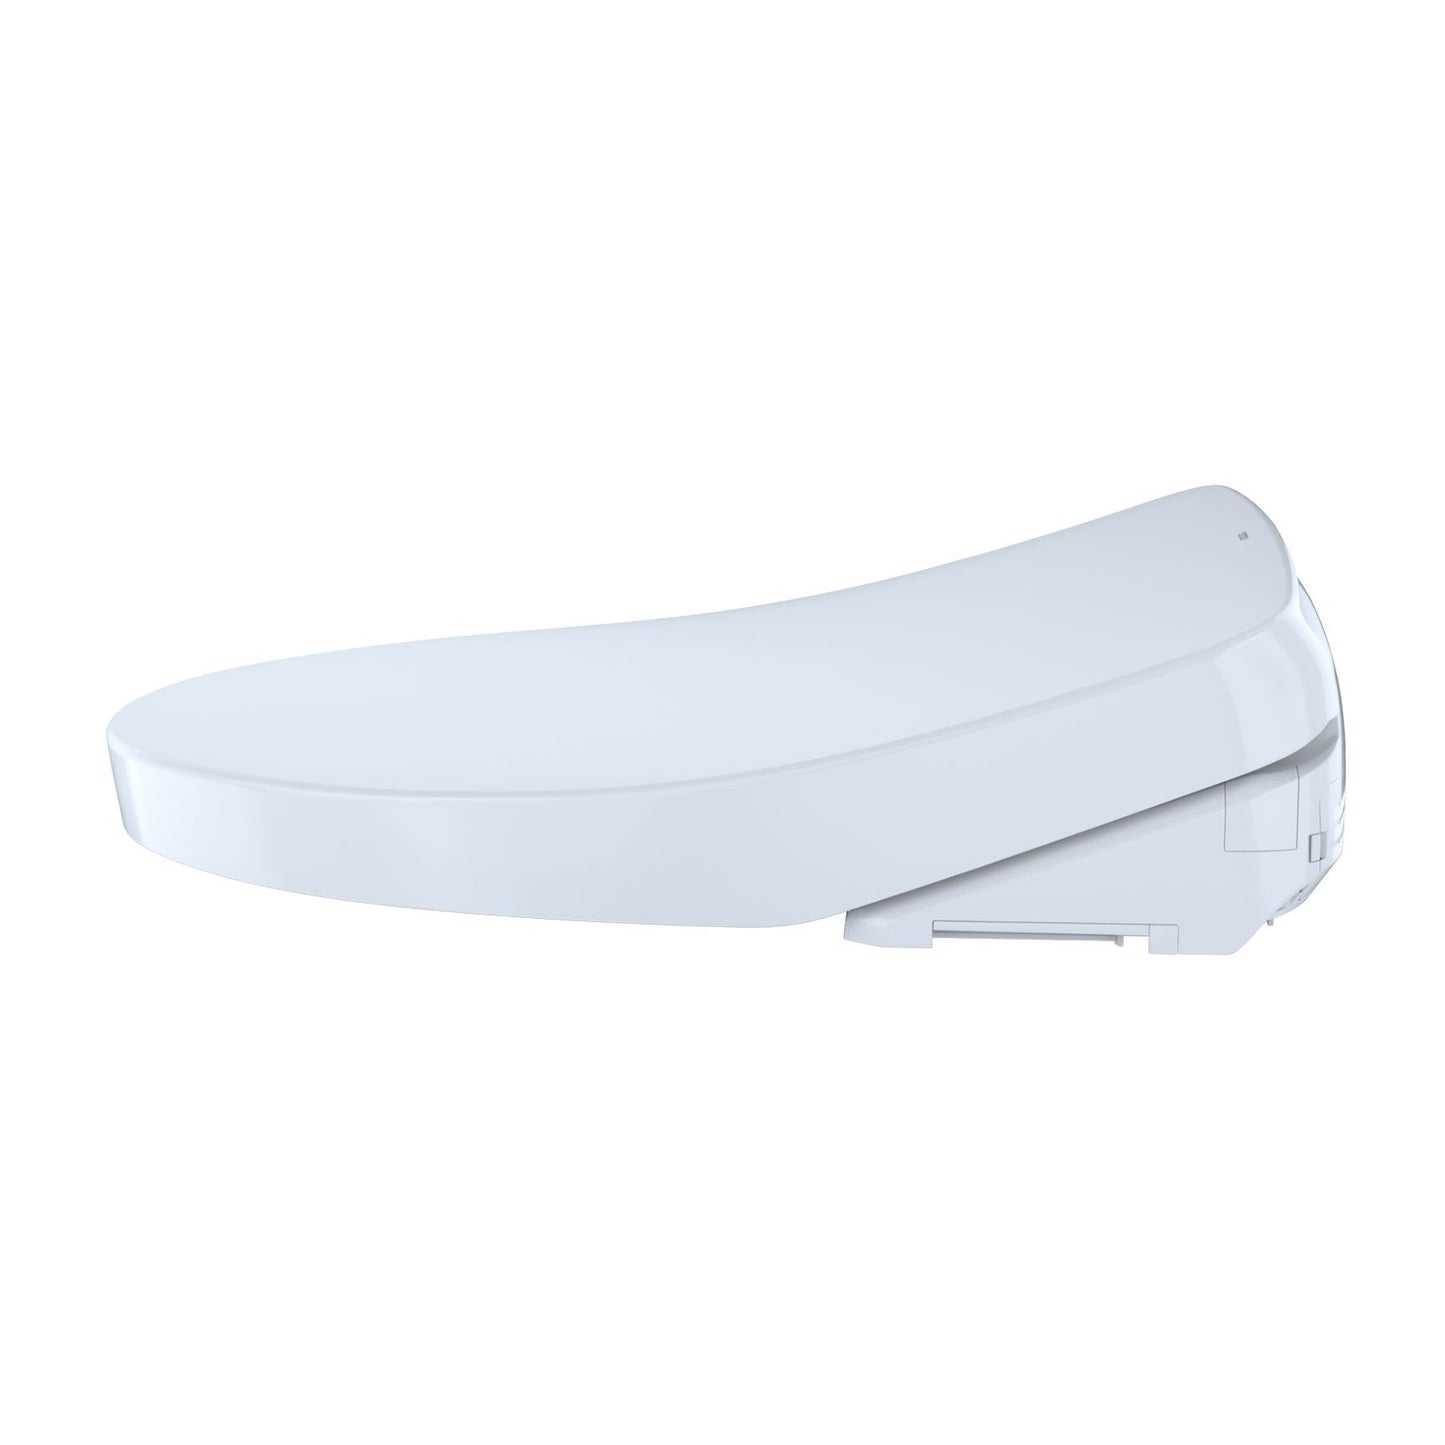 SW3056AT40#01 - S550E  WASHLET+ Contemporary Elongated Washlet with EWATER+ in Cotton White